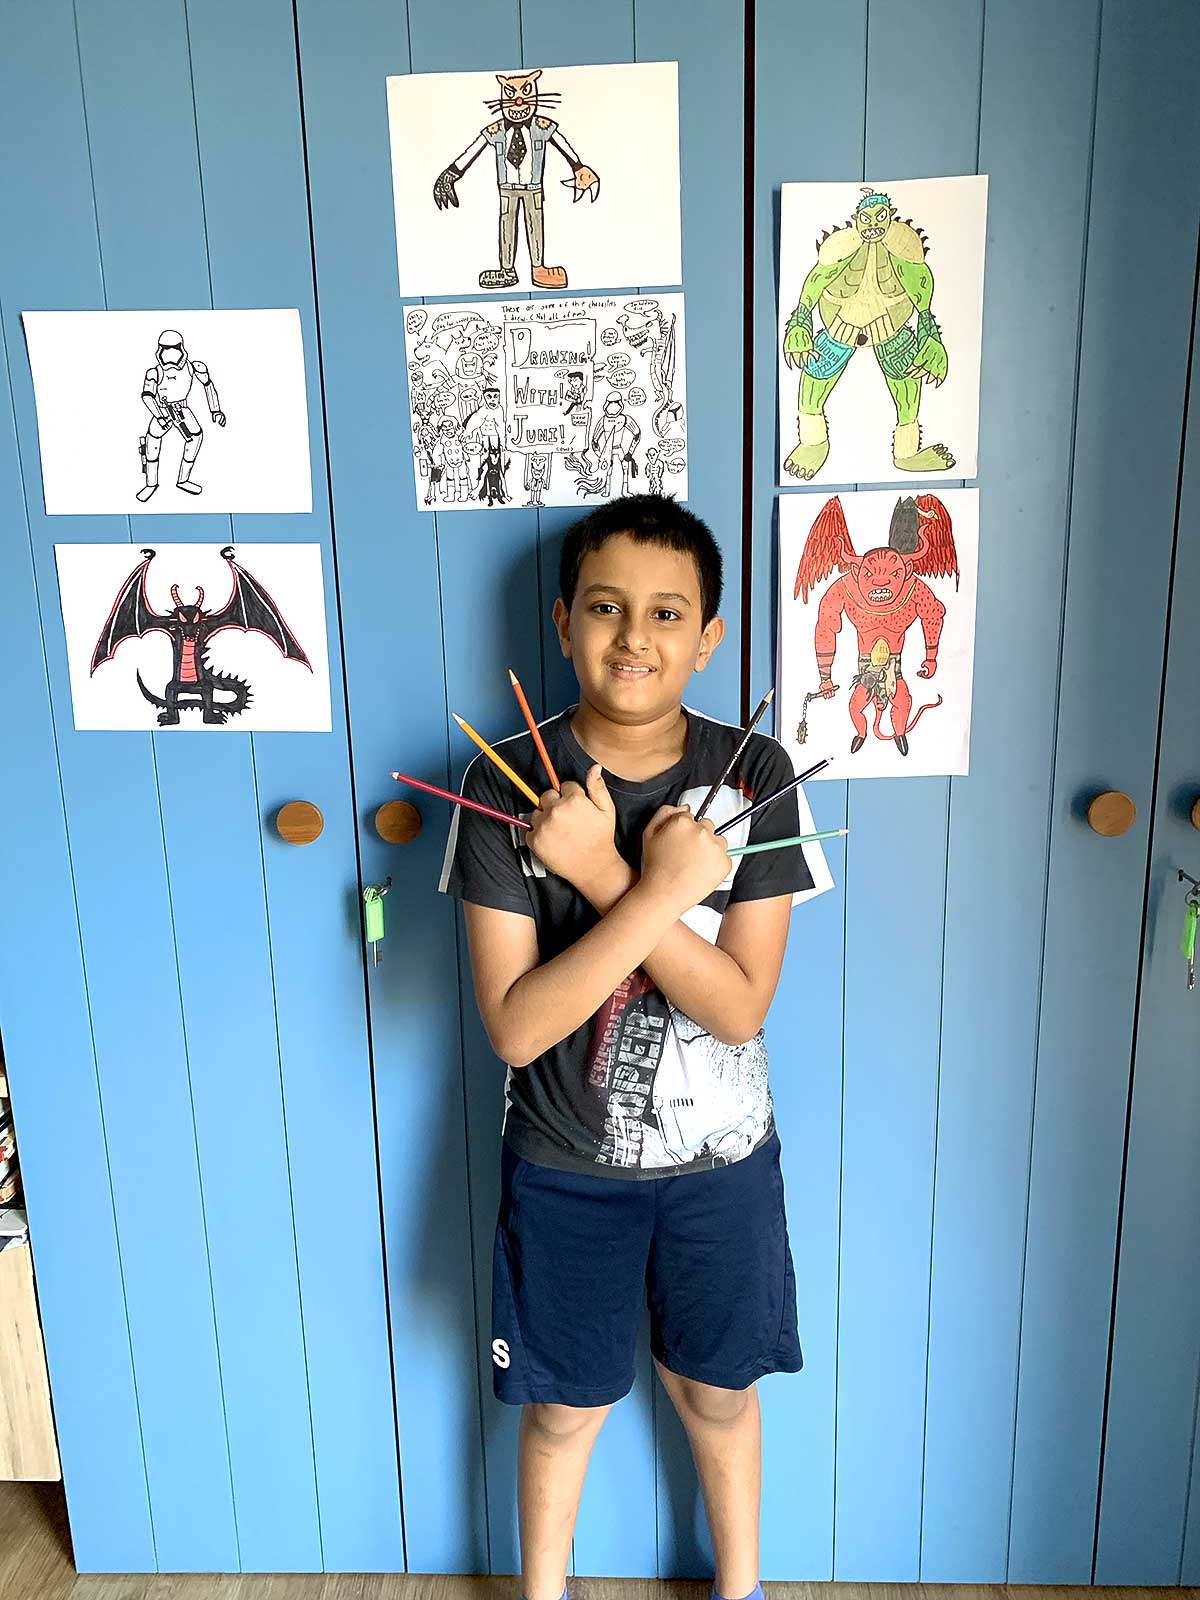 He draws, teaches and he's only 9! - Rediff.com